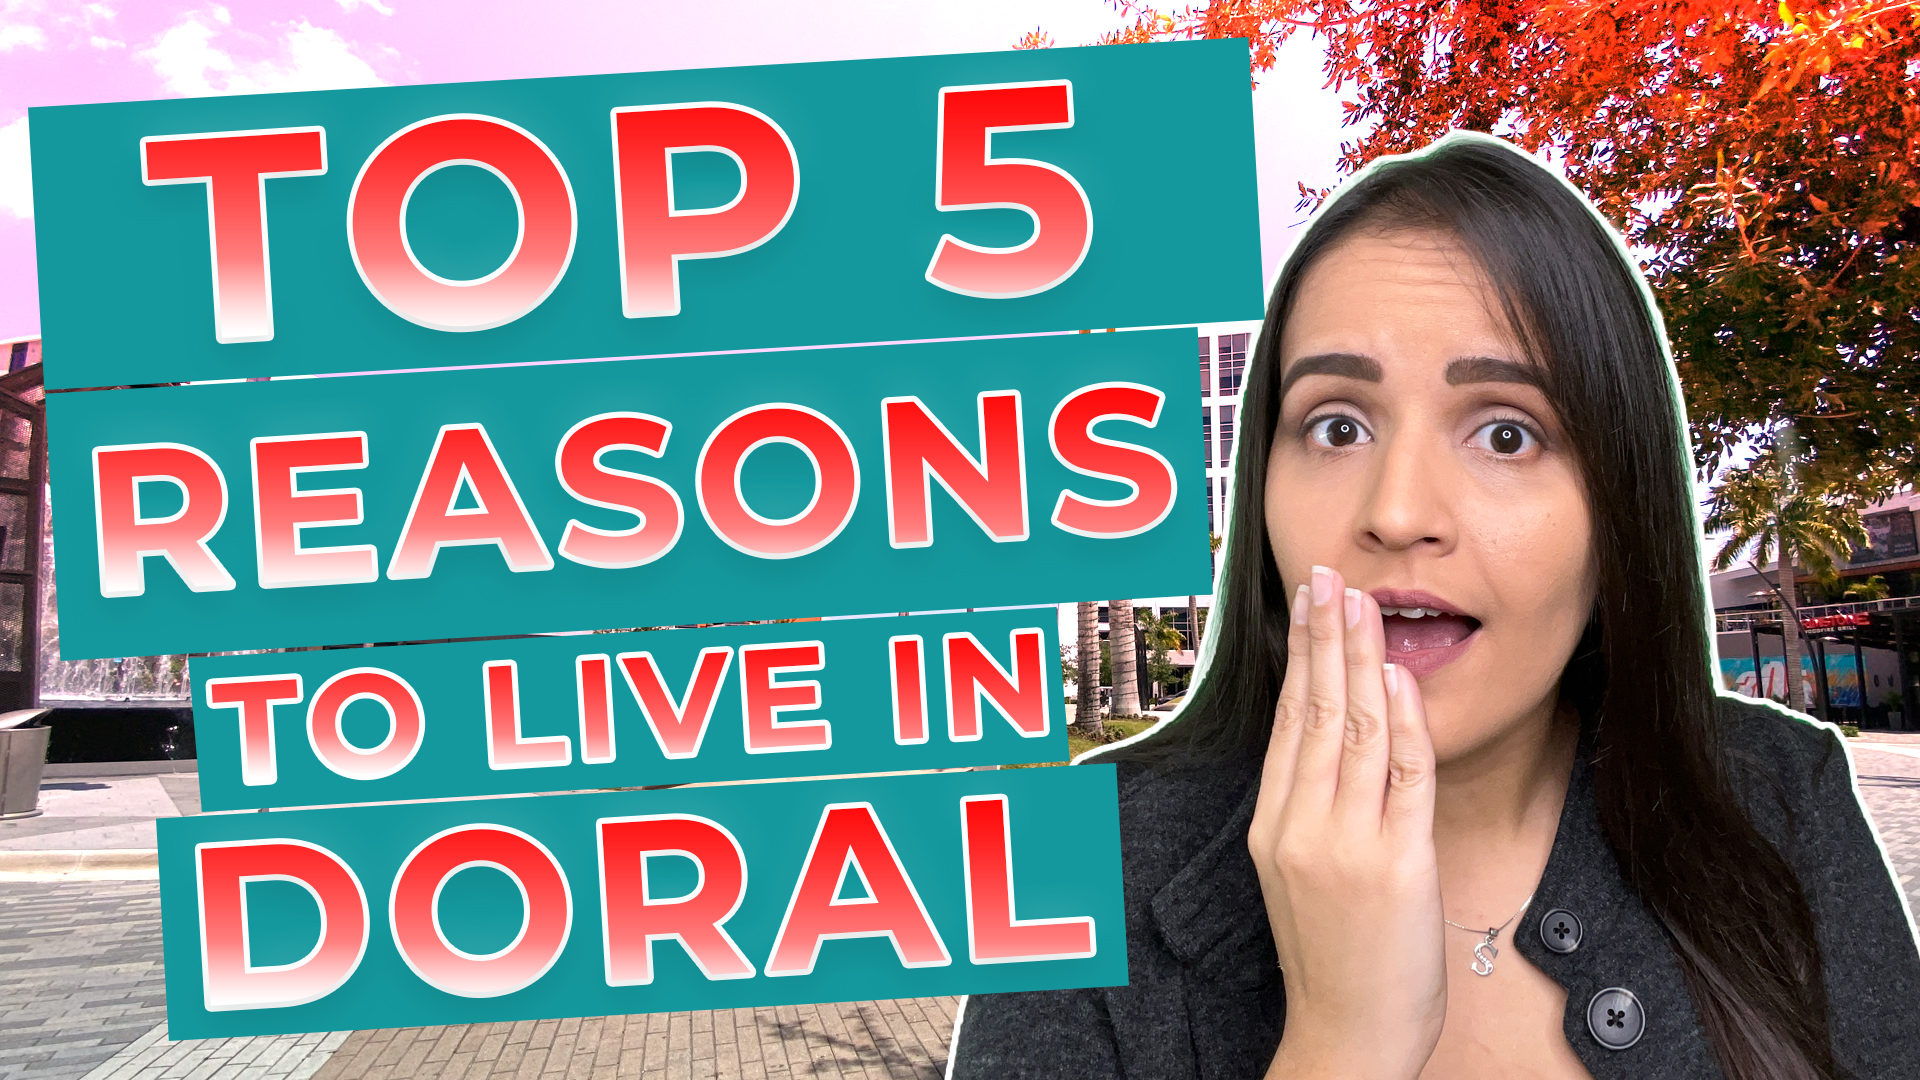 Top 5 Reasons To Live In Doral Fl Sharon Colon Re